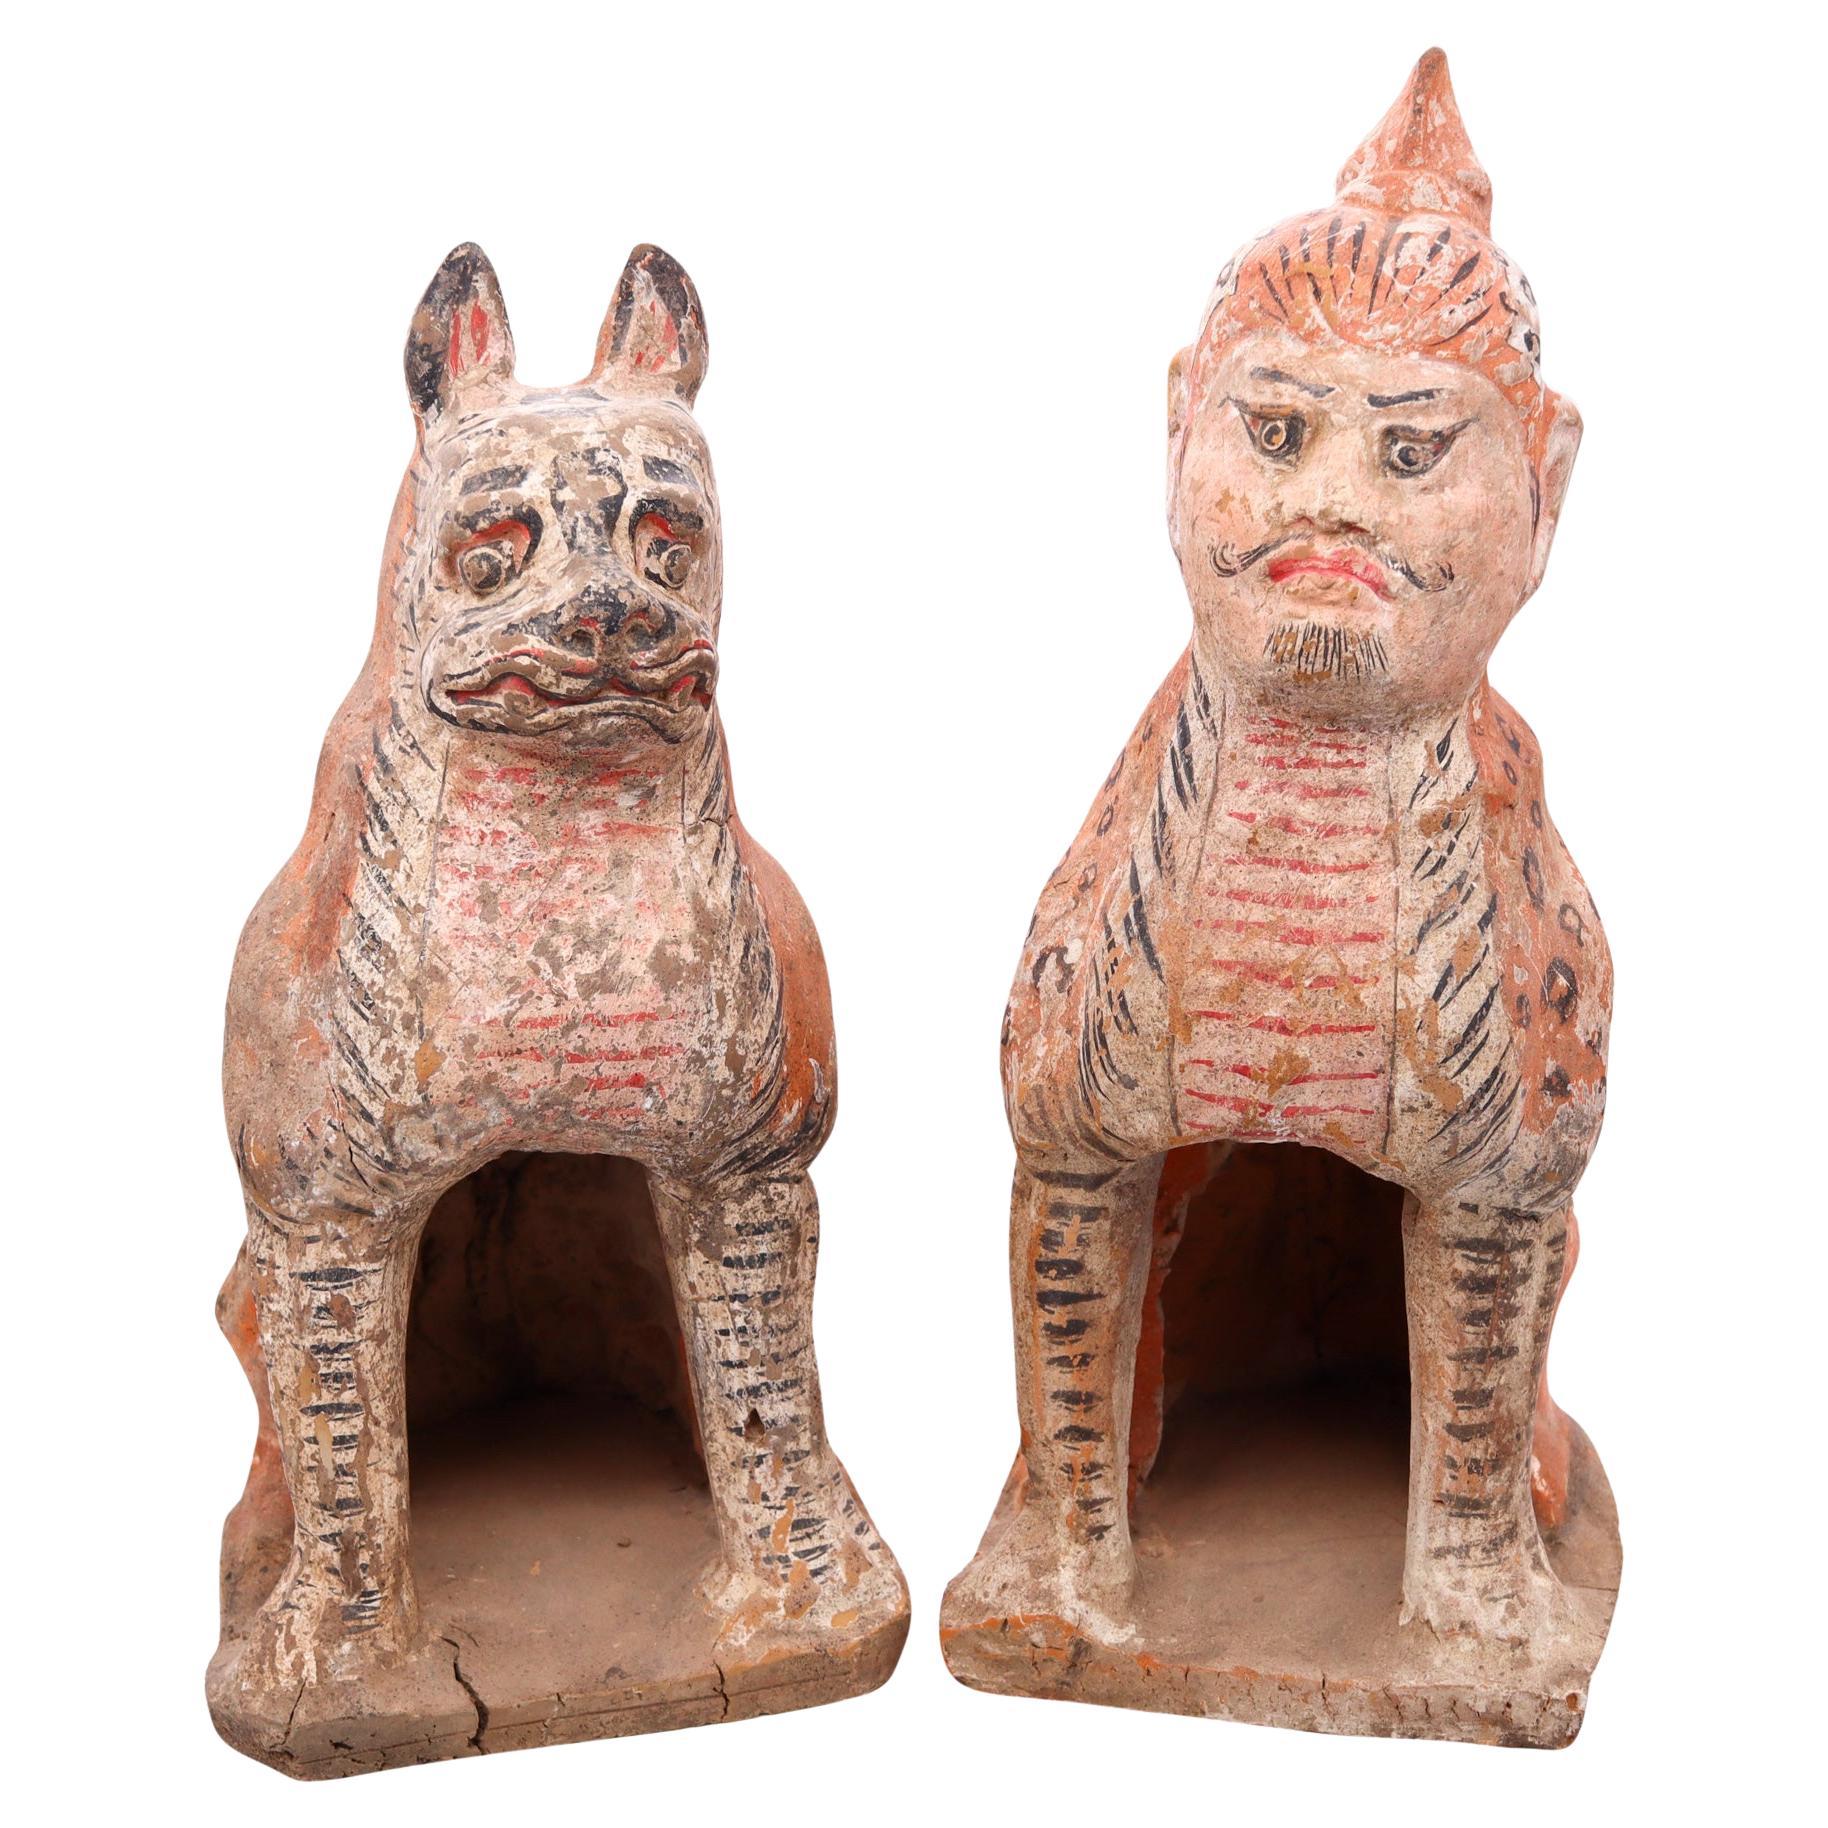 China 618-907 AD Tang Dynasty Pair Of Polychromate Earth Spirits Zhenmushou For Sale